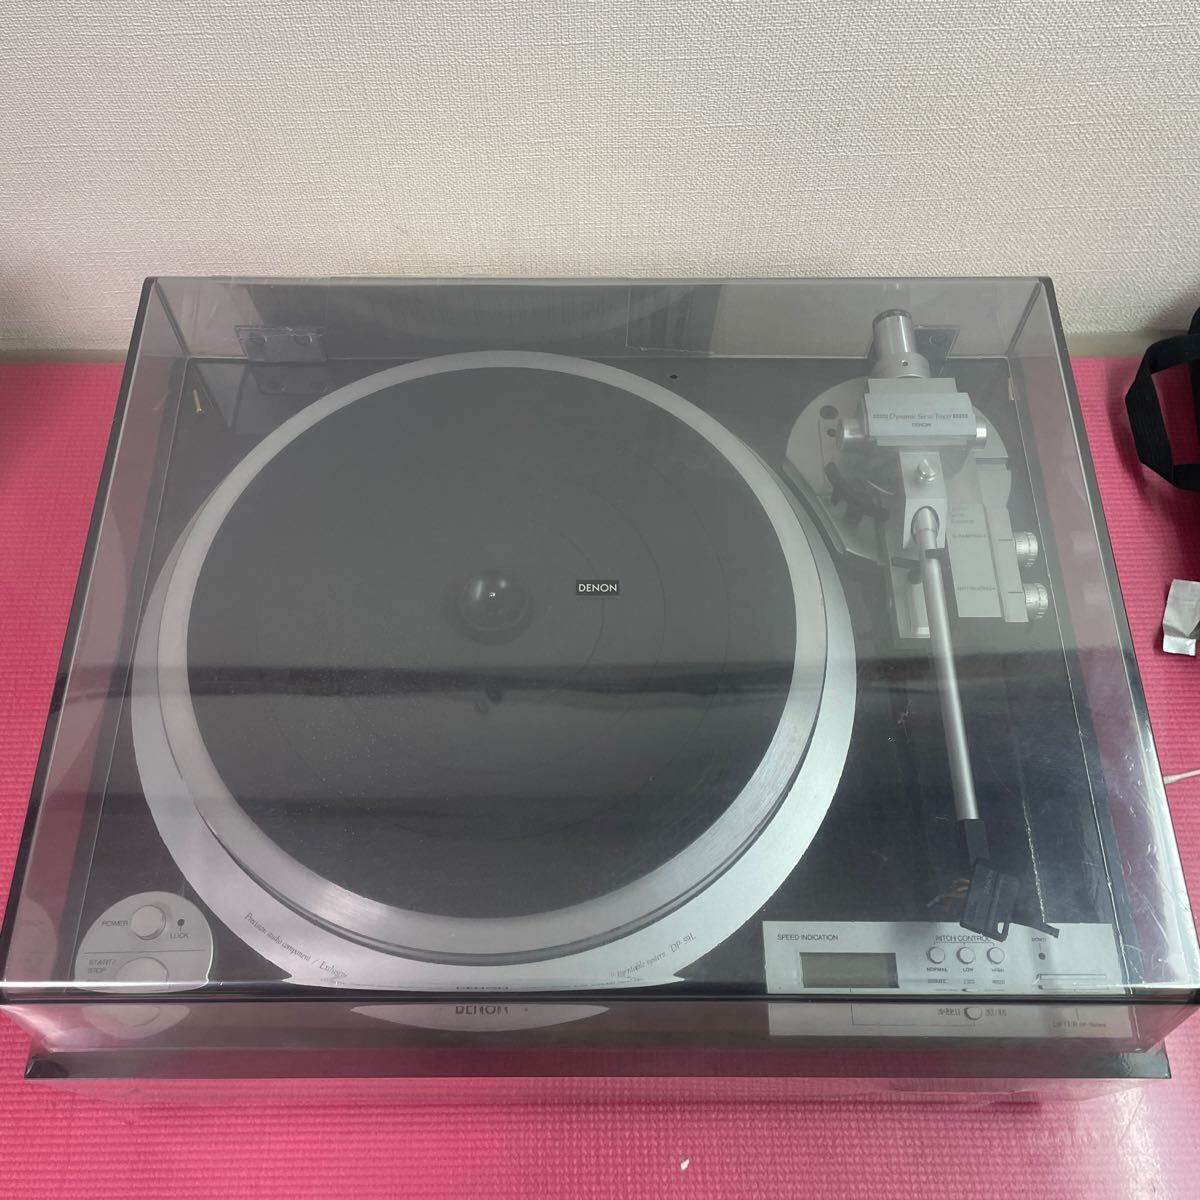  new goods!DENON Denon DP-59L turntable record player new goods unopened present condition goods 